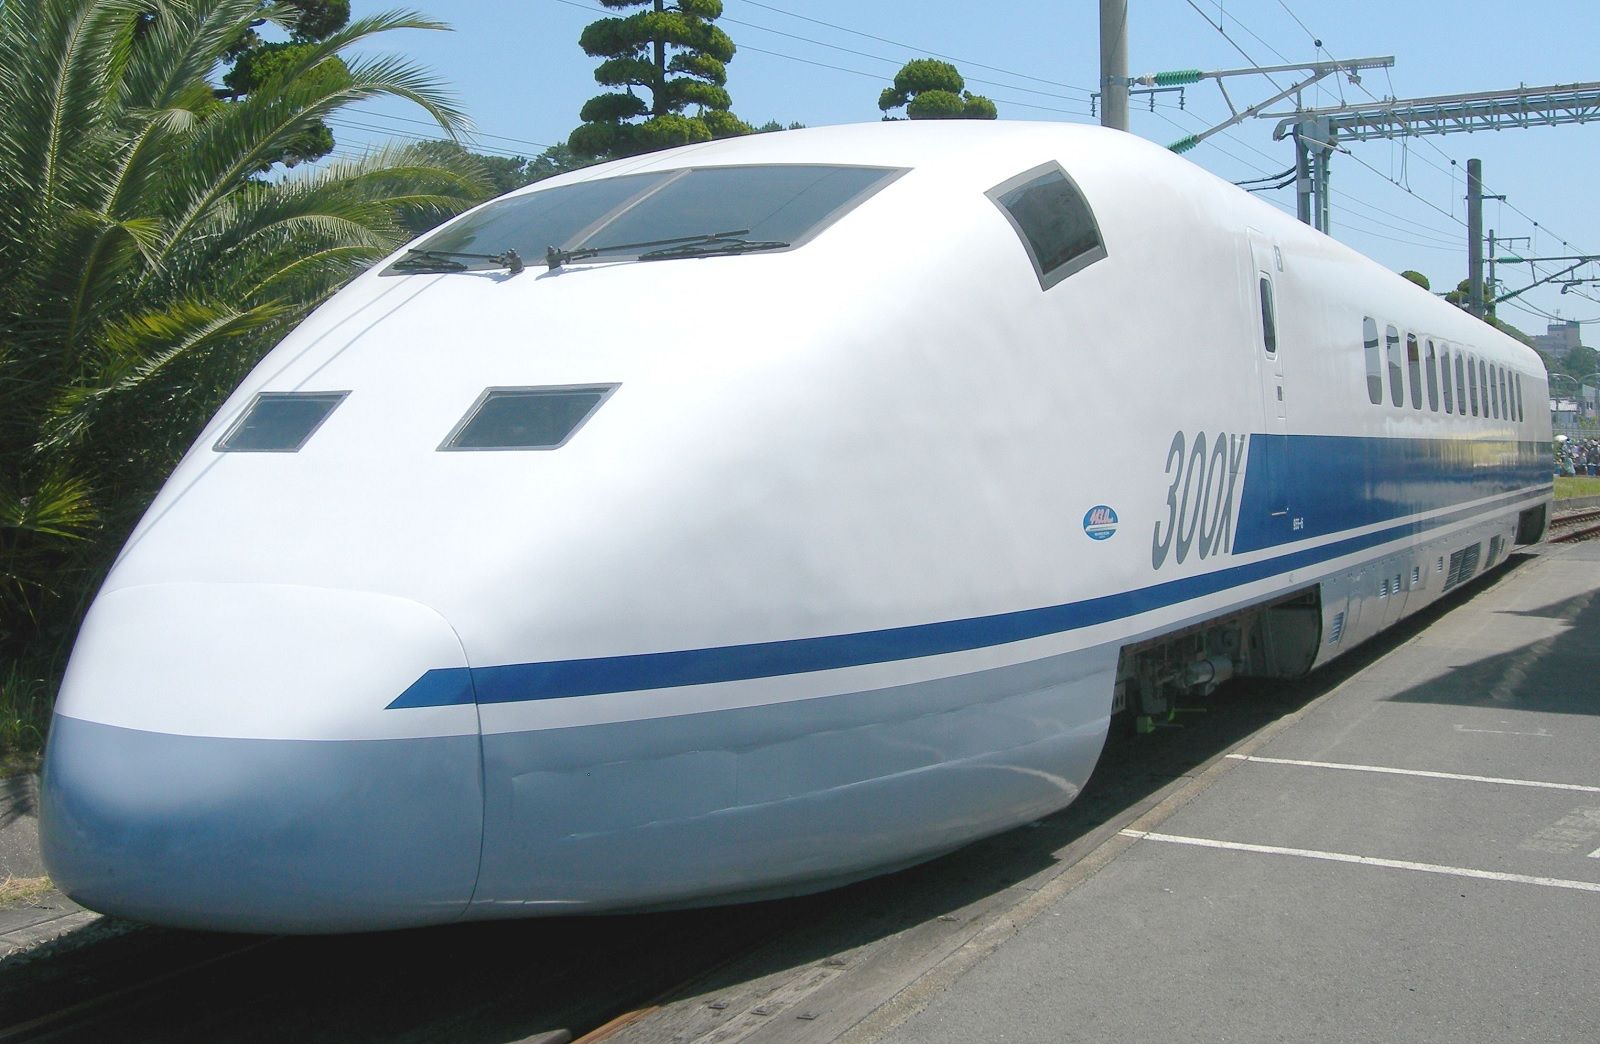 The Fastest Trains Around World Record Breaking Trains image 10